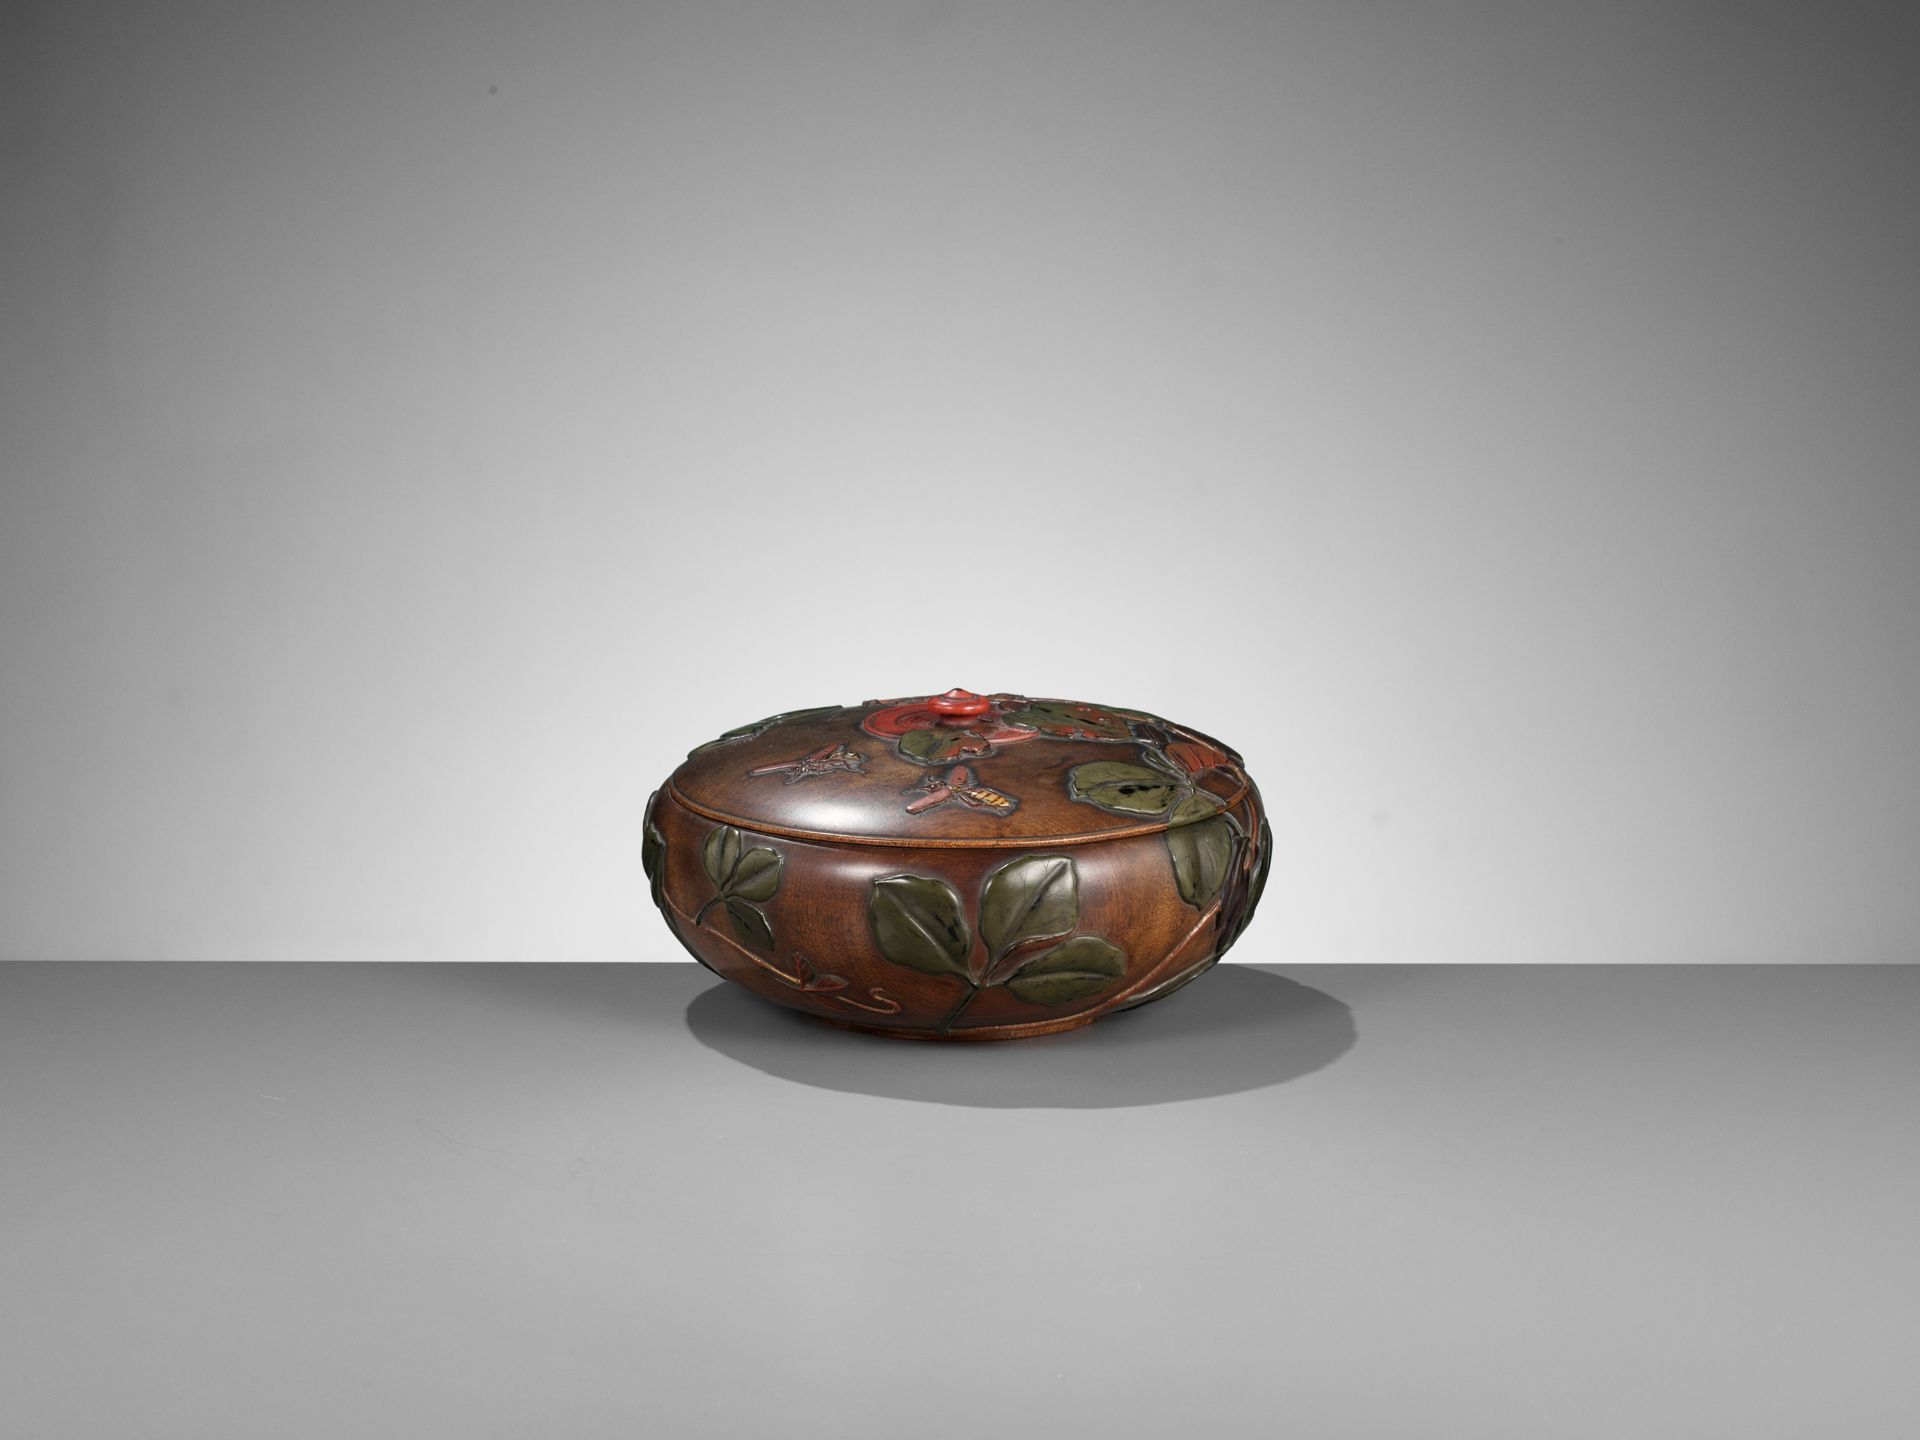 IKKOKUSAI: A SUPERB TAKAMORIE LACQUERED CIRCULAR WOOD BOX AND COVER WITH INSECTS AND LEAVES - Image 8 of 12